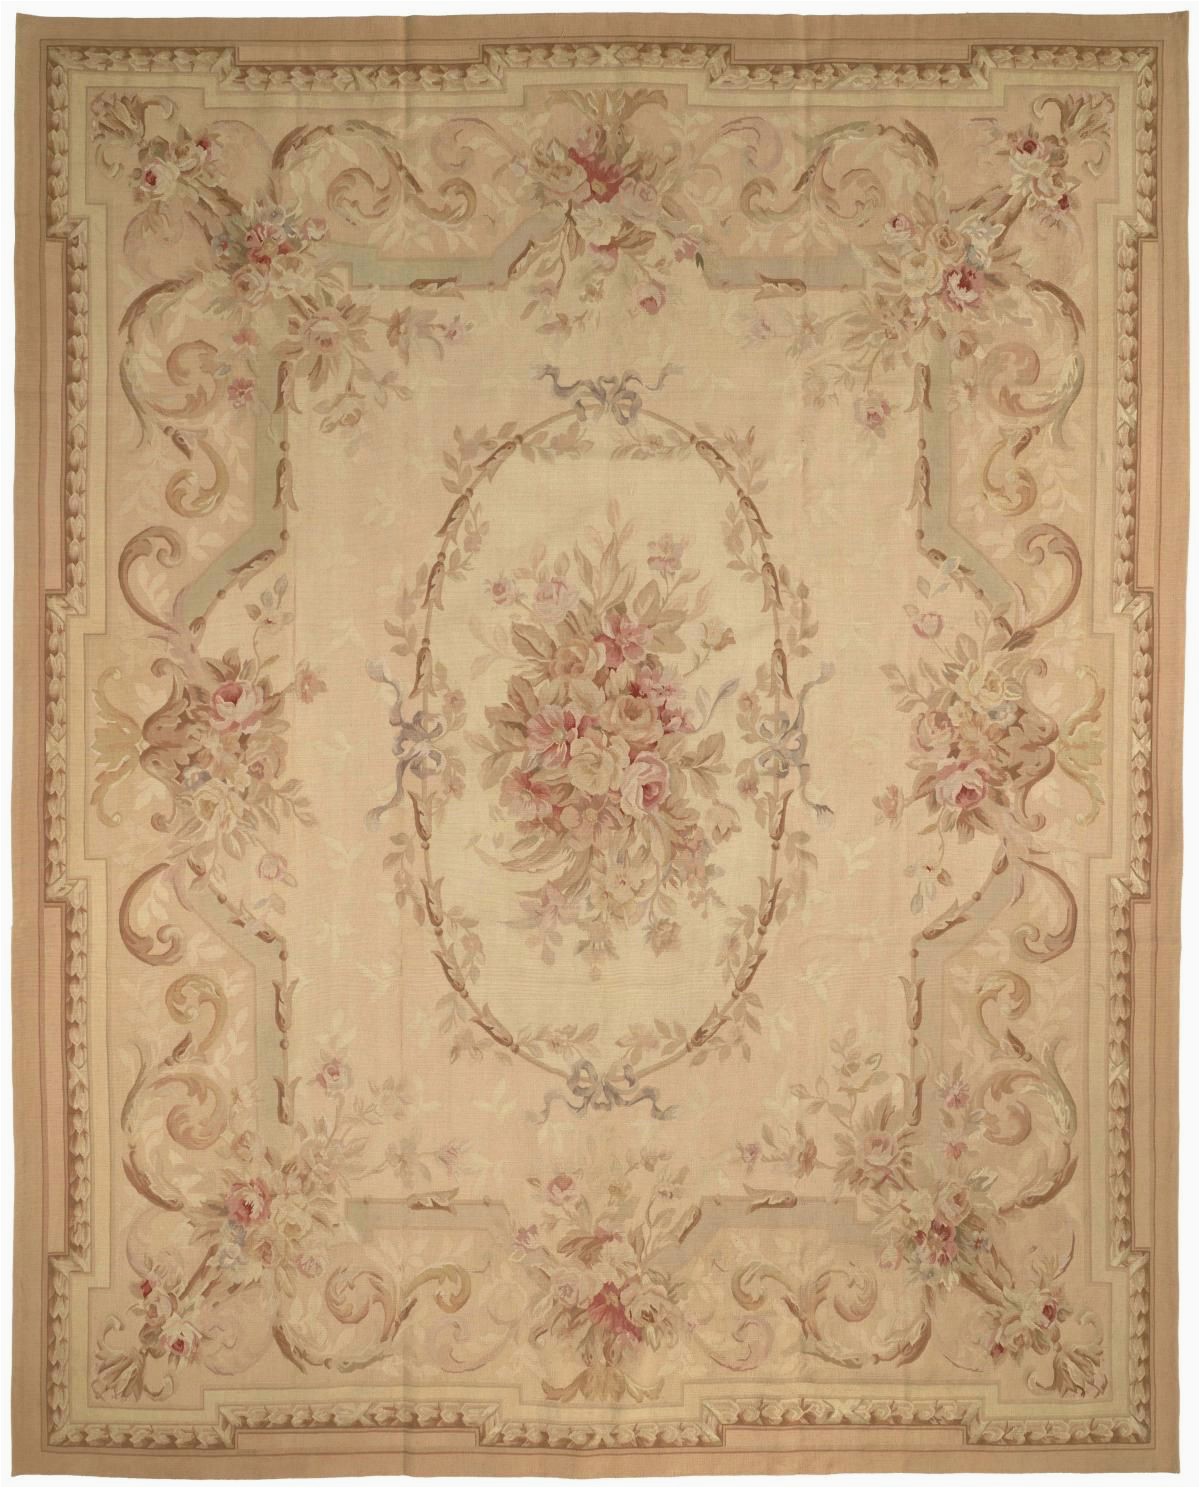 French Country Wool area Rugs Rug Au16 Aubusson area Rugs by Safavieh